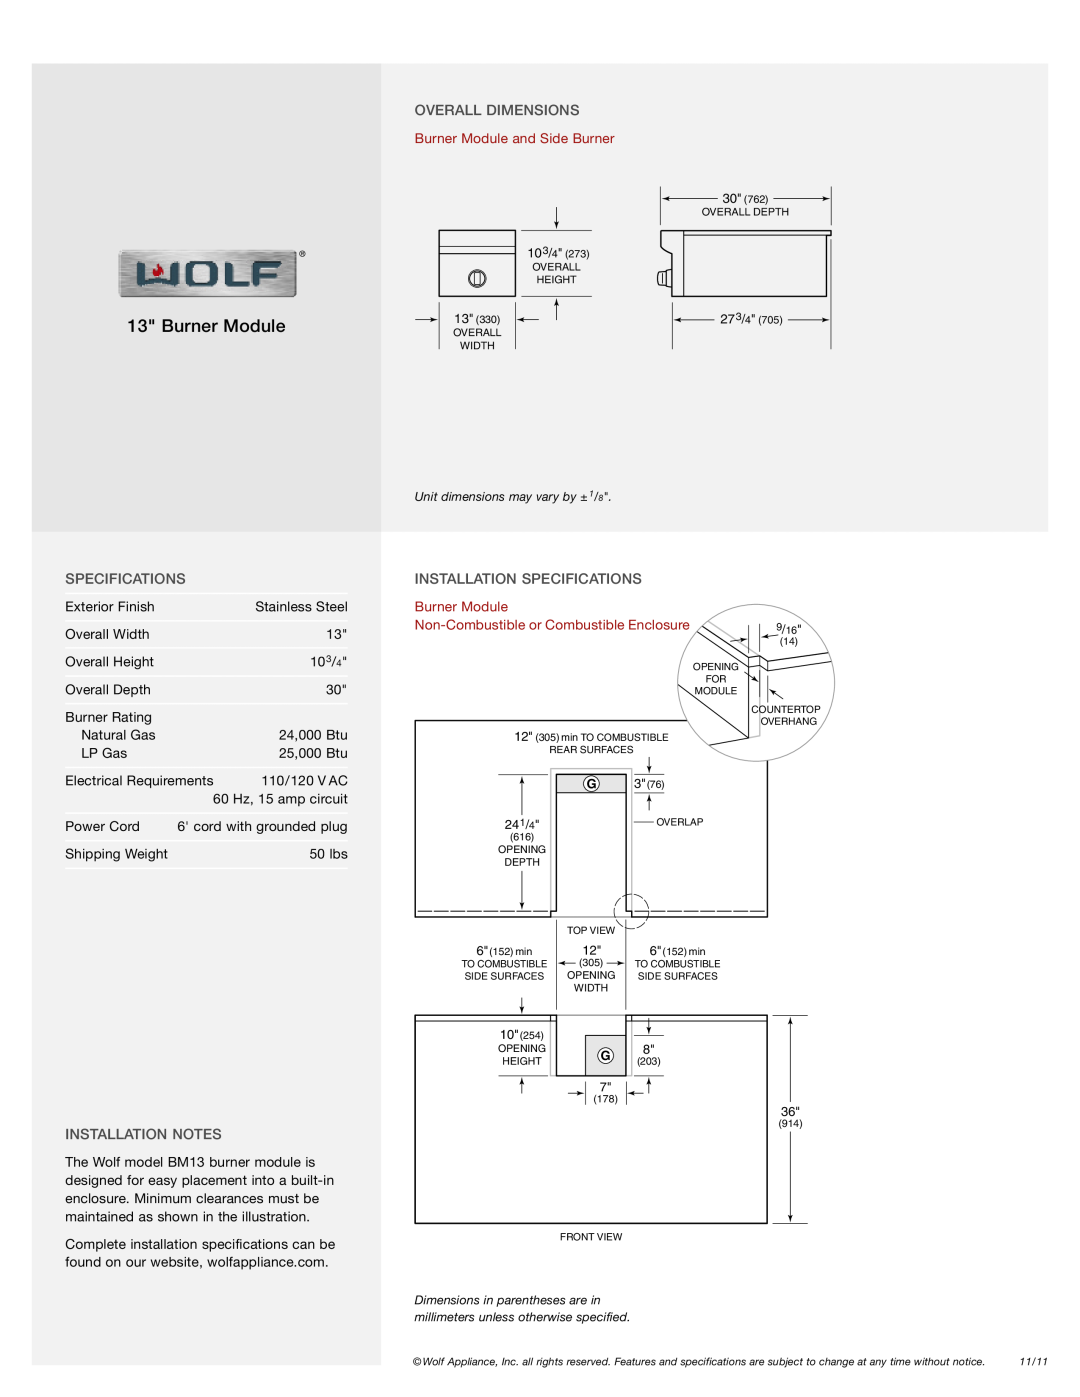 Wolf Appliance Company SB13, BM13 Overall Dimensions, Installation Notes, Installation Specifications, Burner Module 